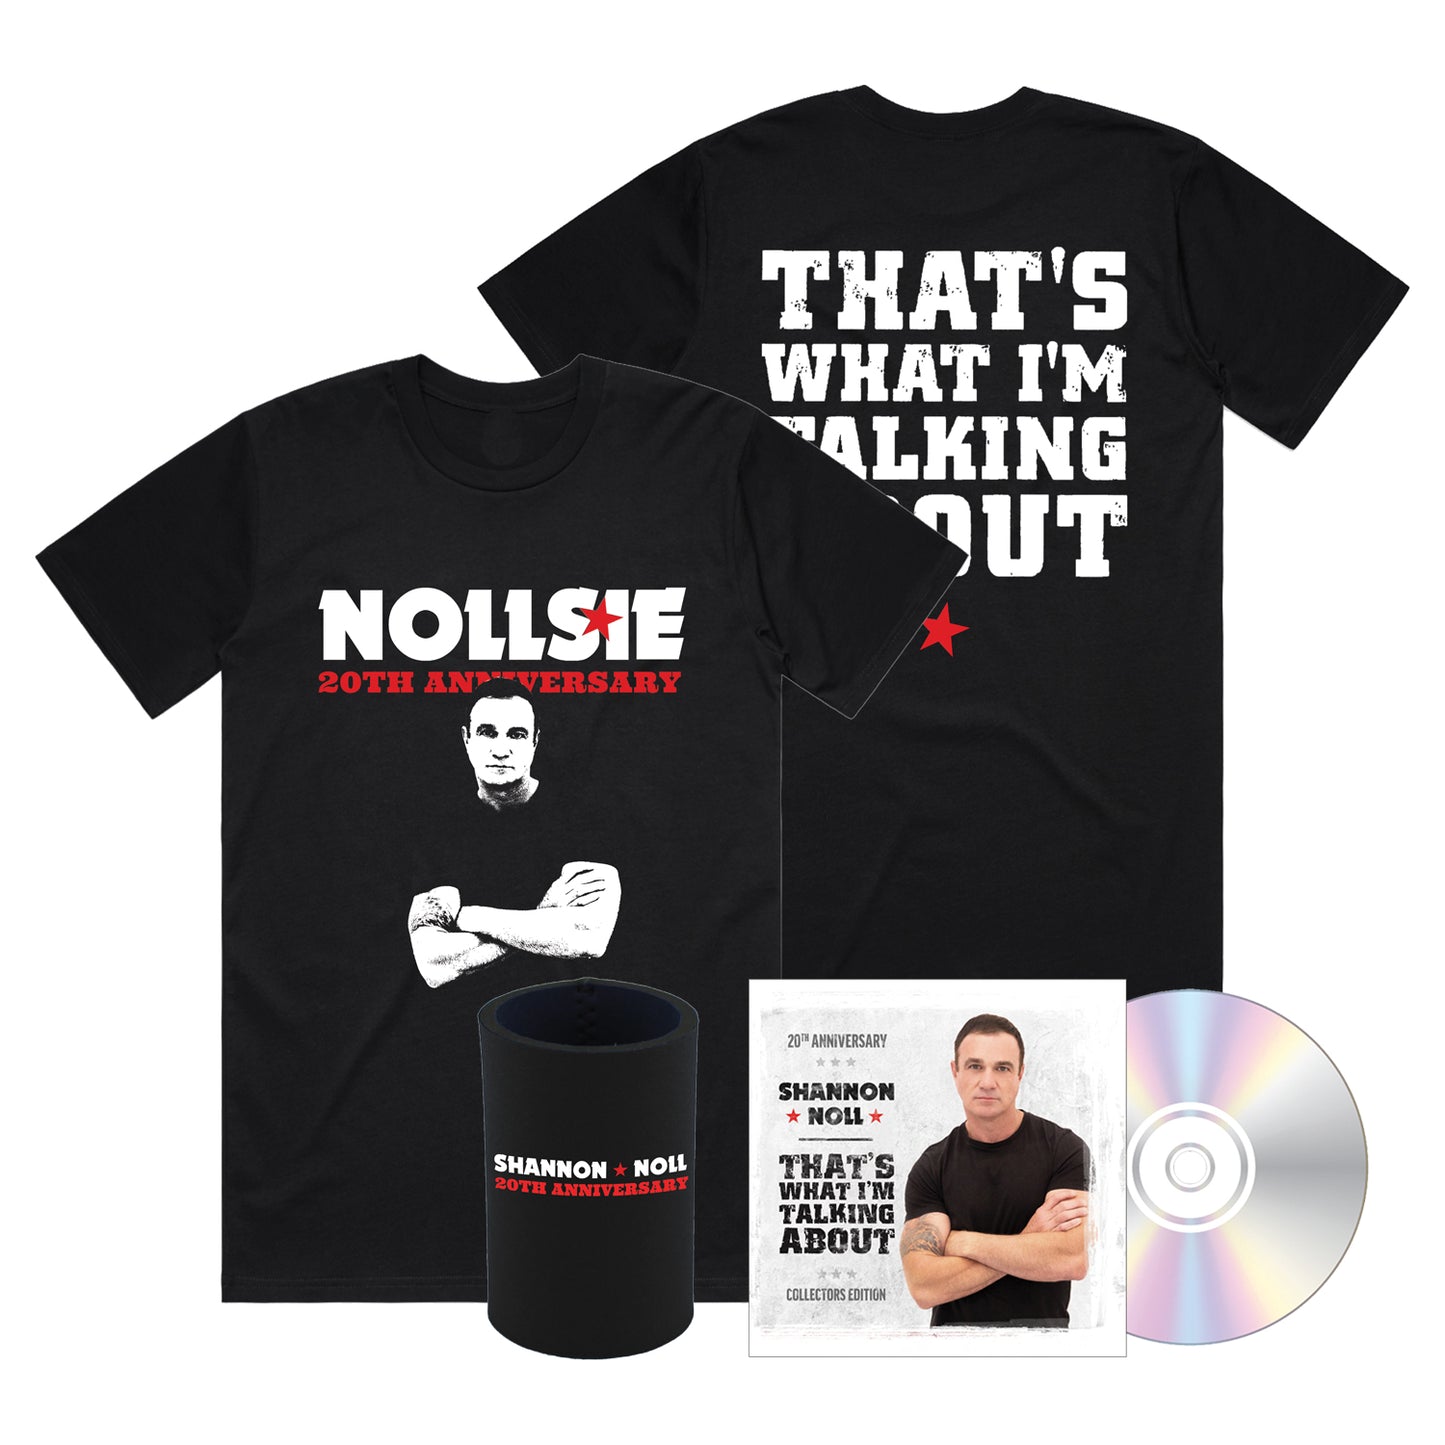 THAT'S WHAT I'M TALKING ABOUT T-SHIRT + 2CD BUNDLE